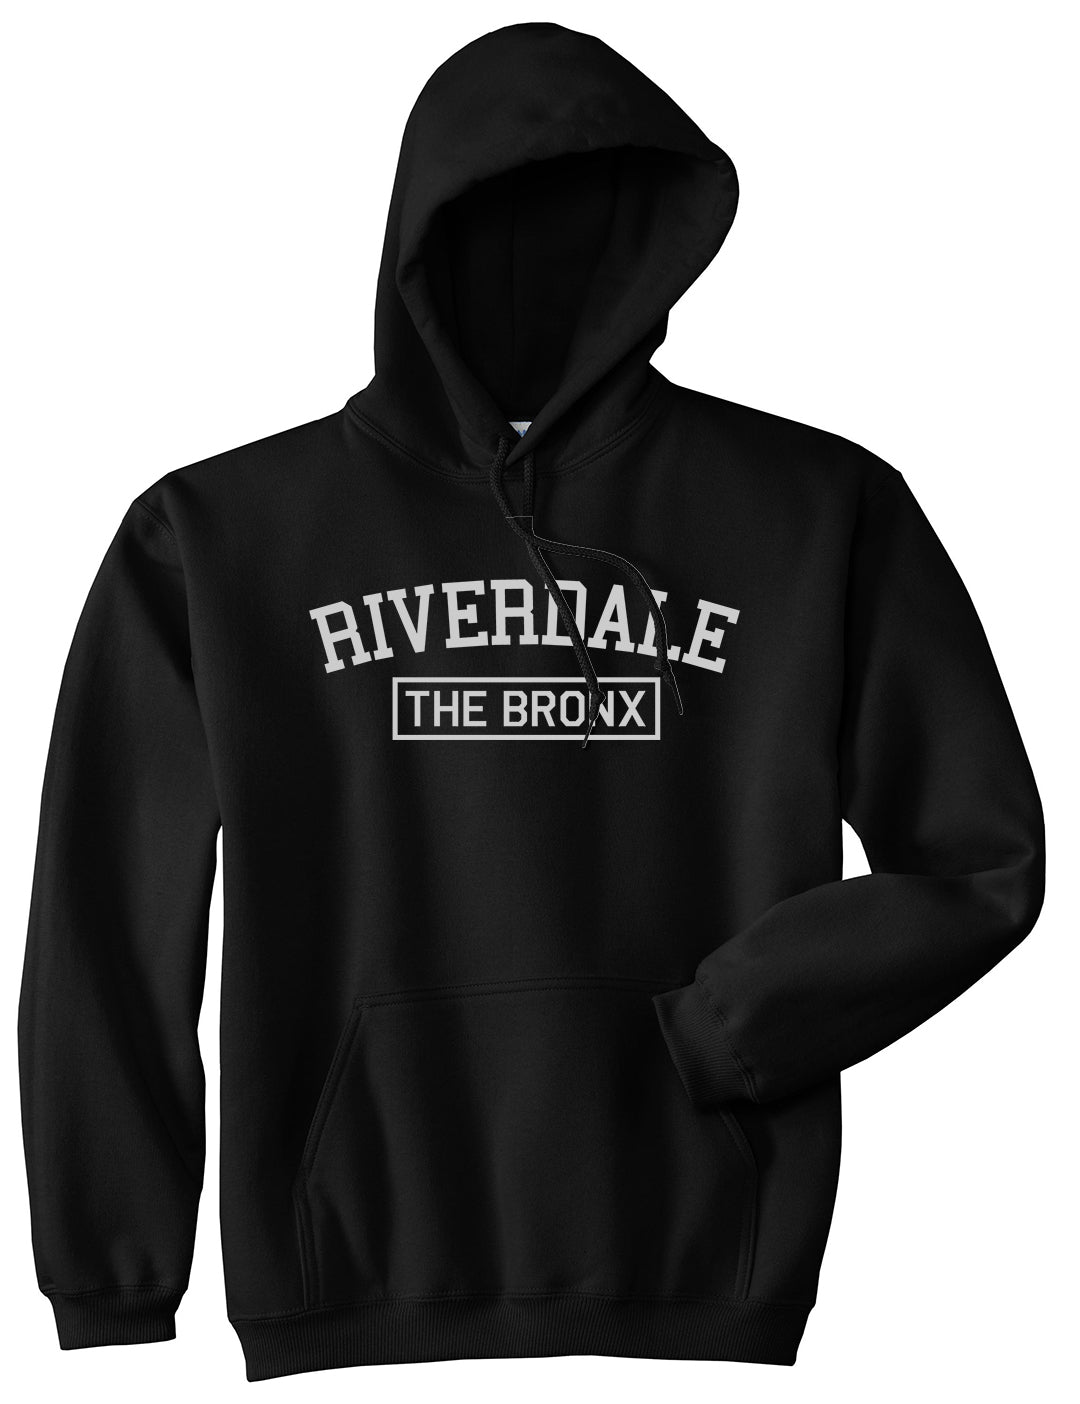 Riverdale The Bronx NY Mens Pullover Hoodie Black